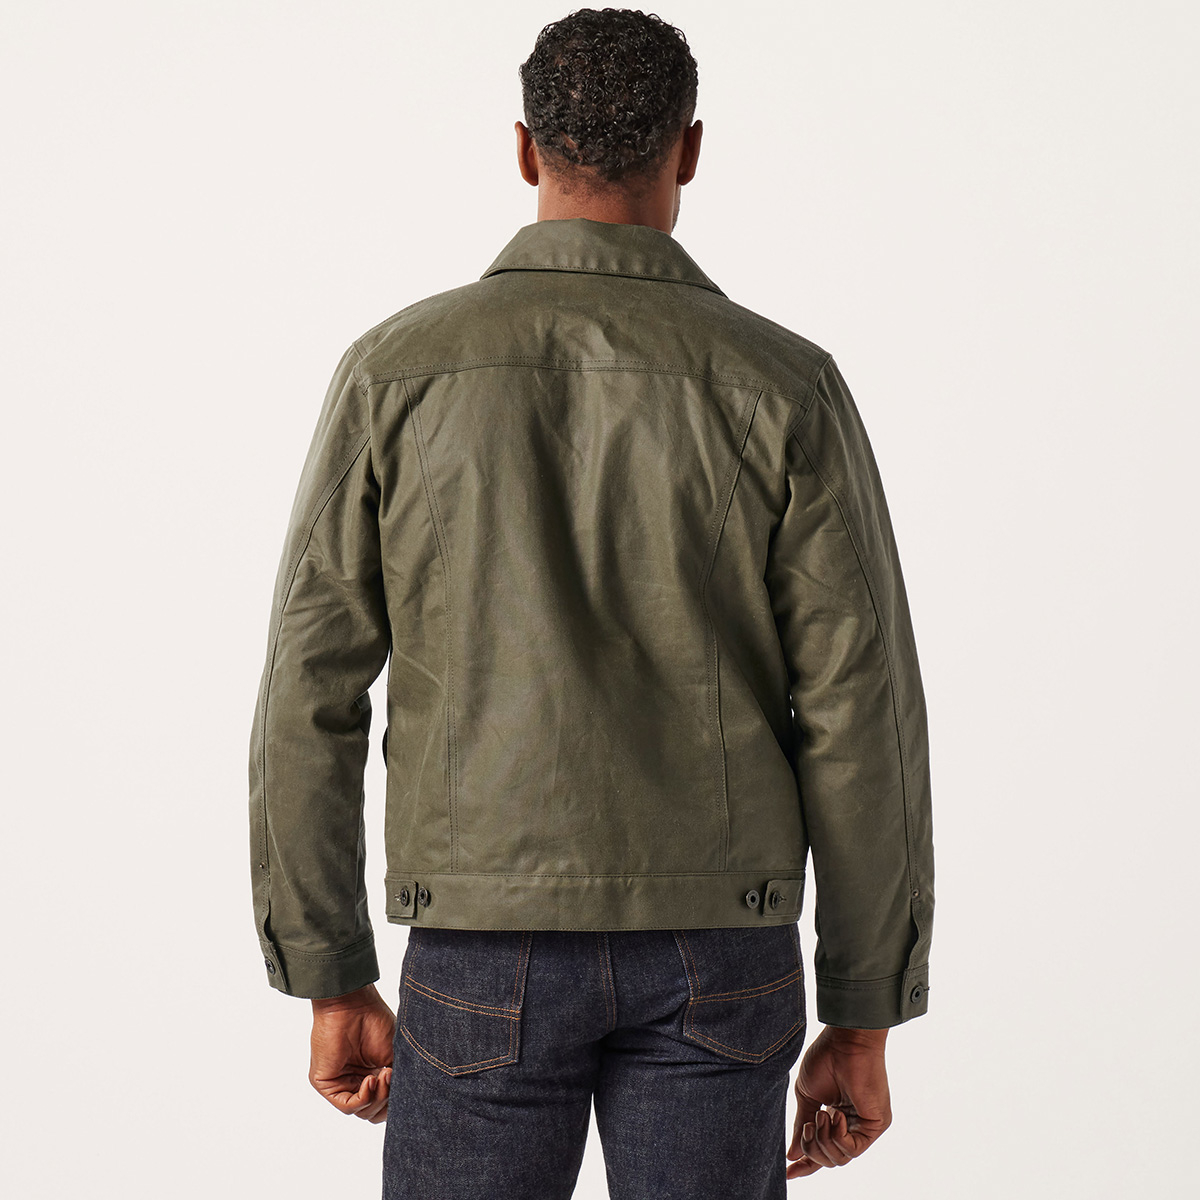 Filson Tin Cloth Short Lined Cruiser Jacket Military Green, a lightweight, lined, rain-repellent work jacket with a hip-length hem for the freedom to move